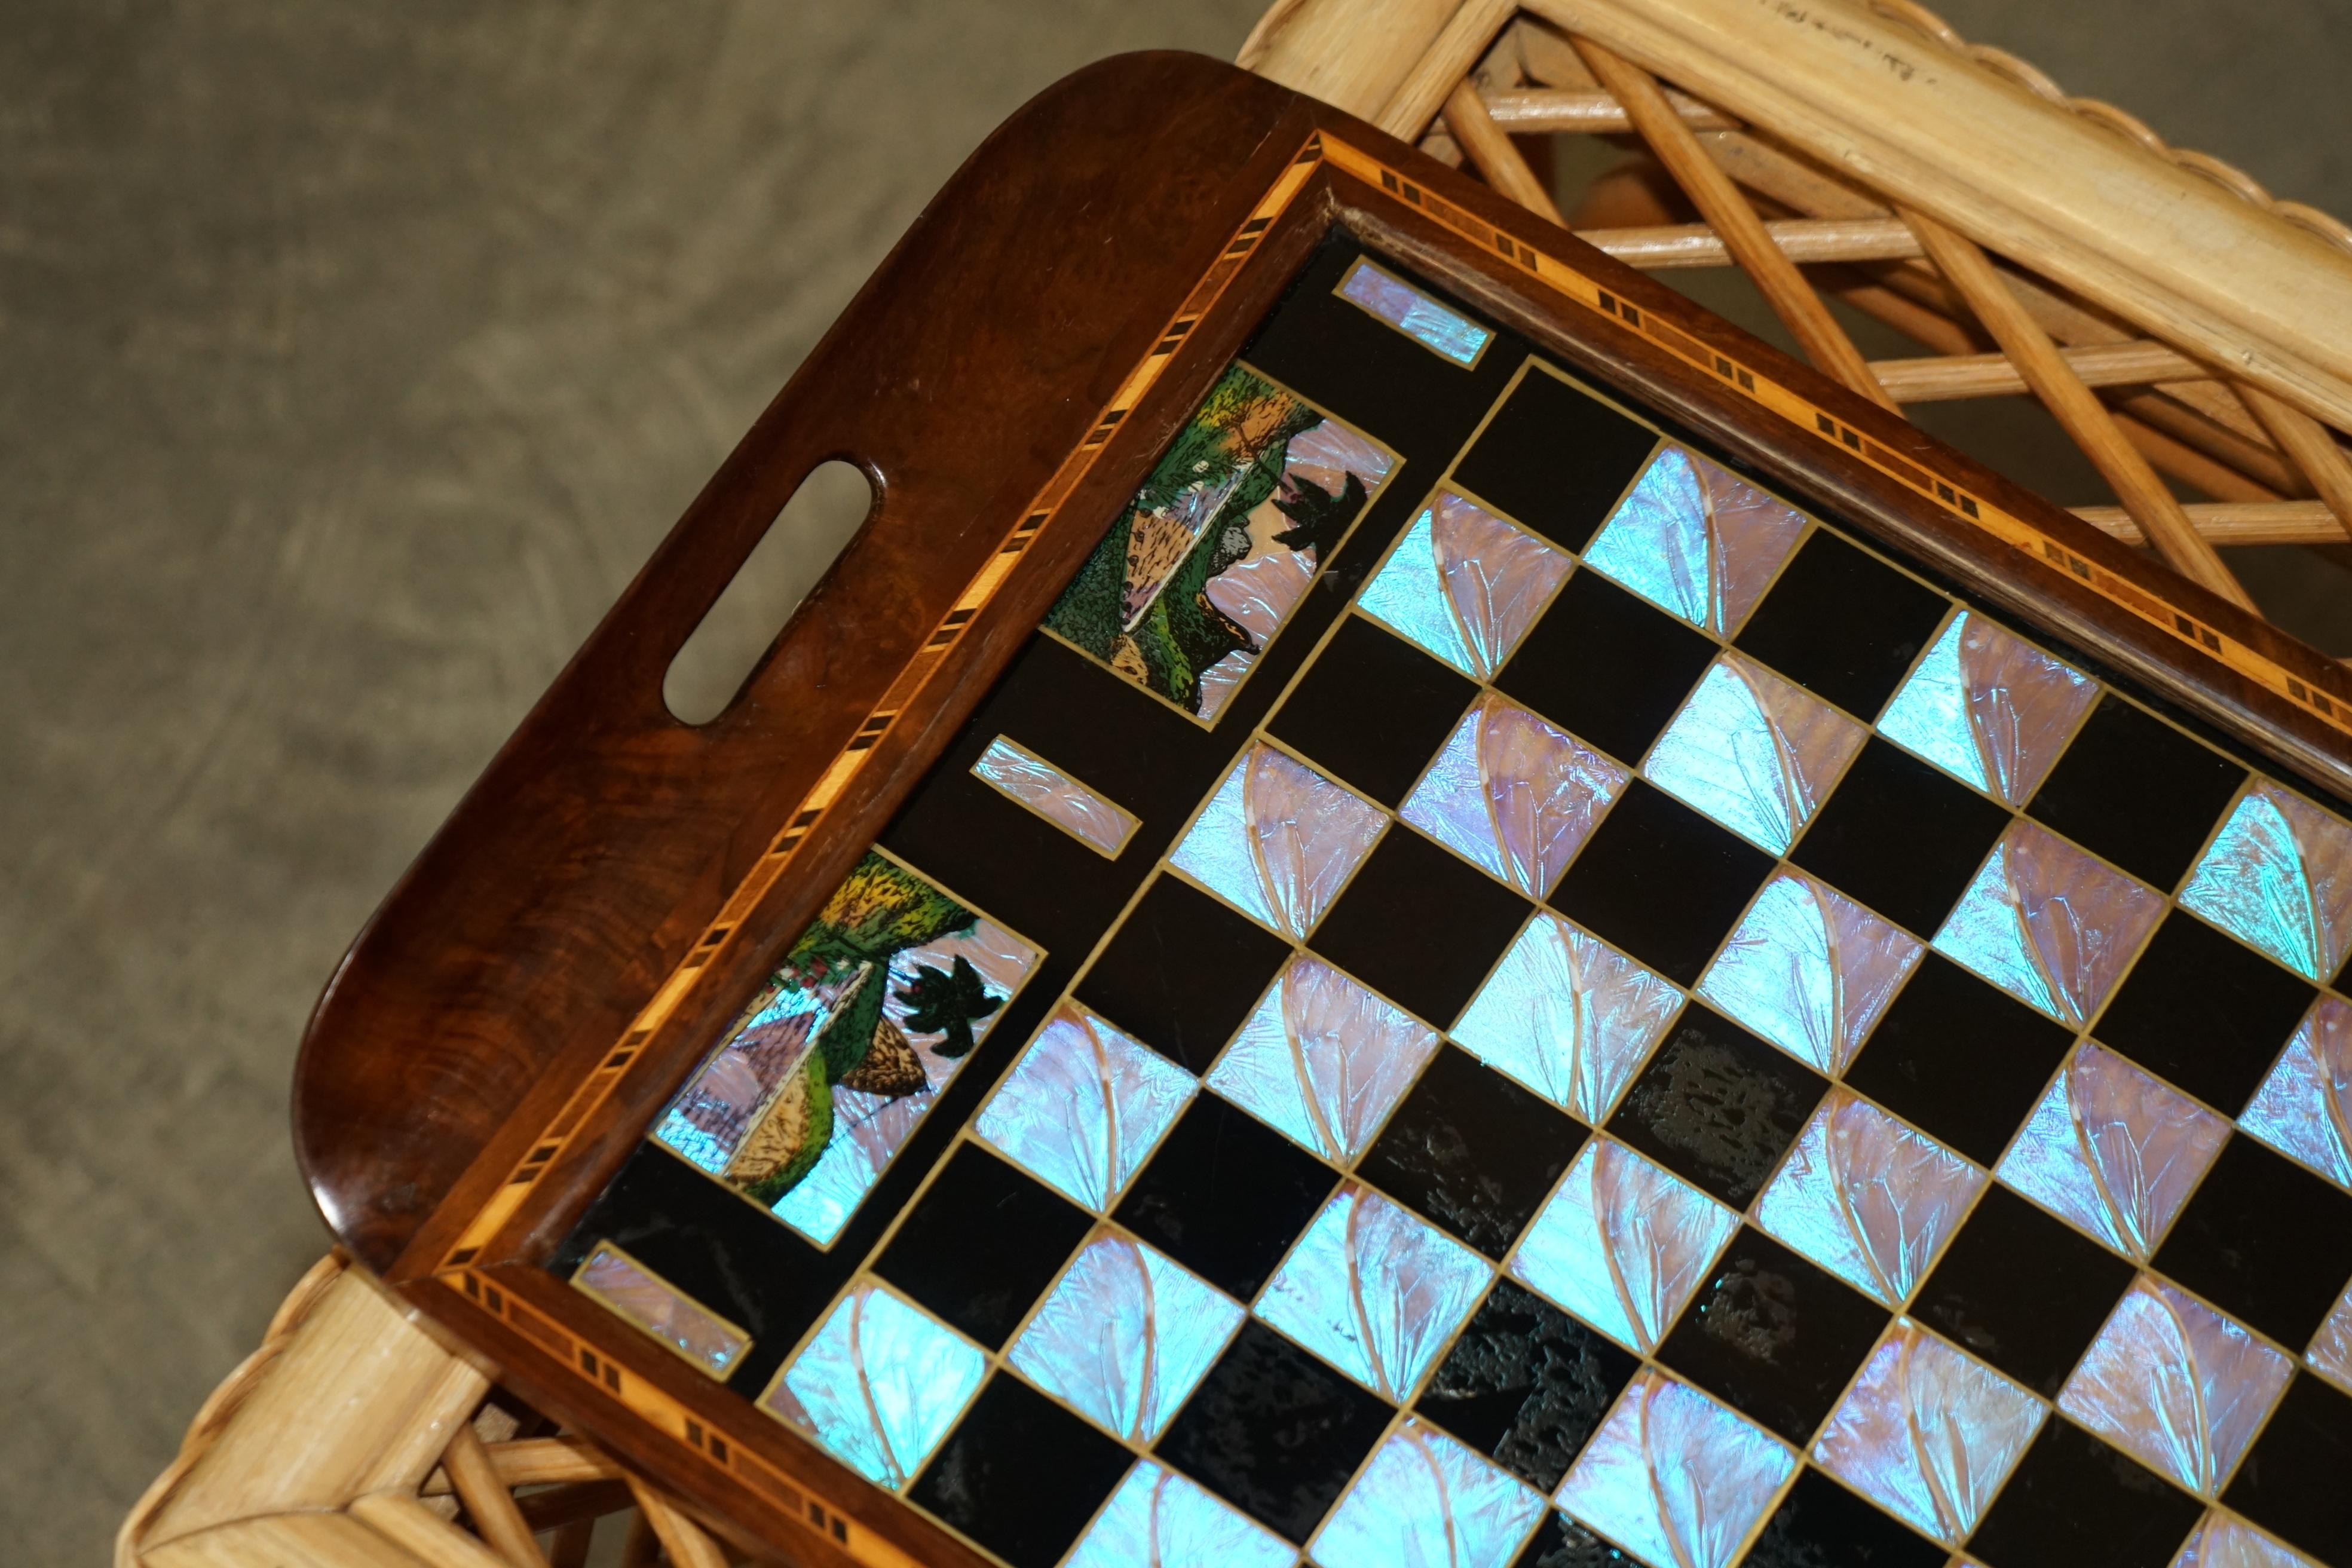 We are delighted to offer for sale this exquisite, very well made original Brazilian Rosewood Chess board tray with Mother of Pearl inlay

This is a well-made and decorative piece, it has Brazilian Rosewood as the main frame which is now an